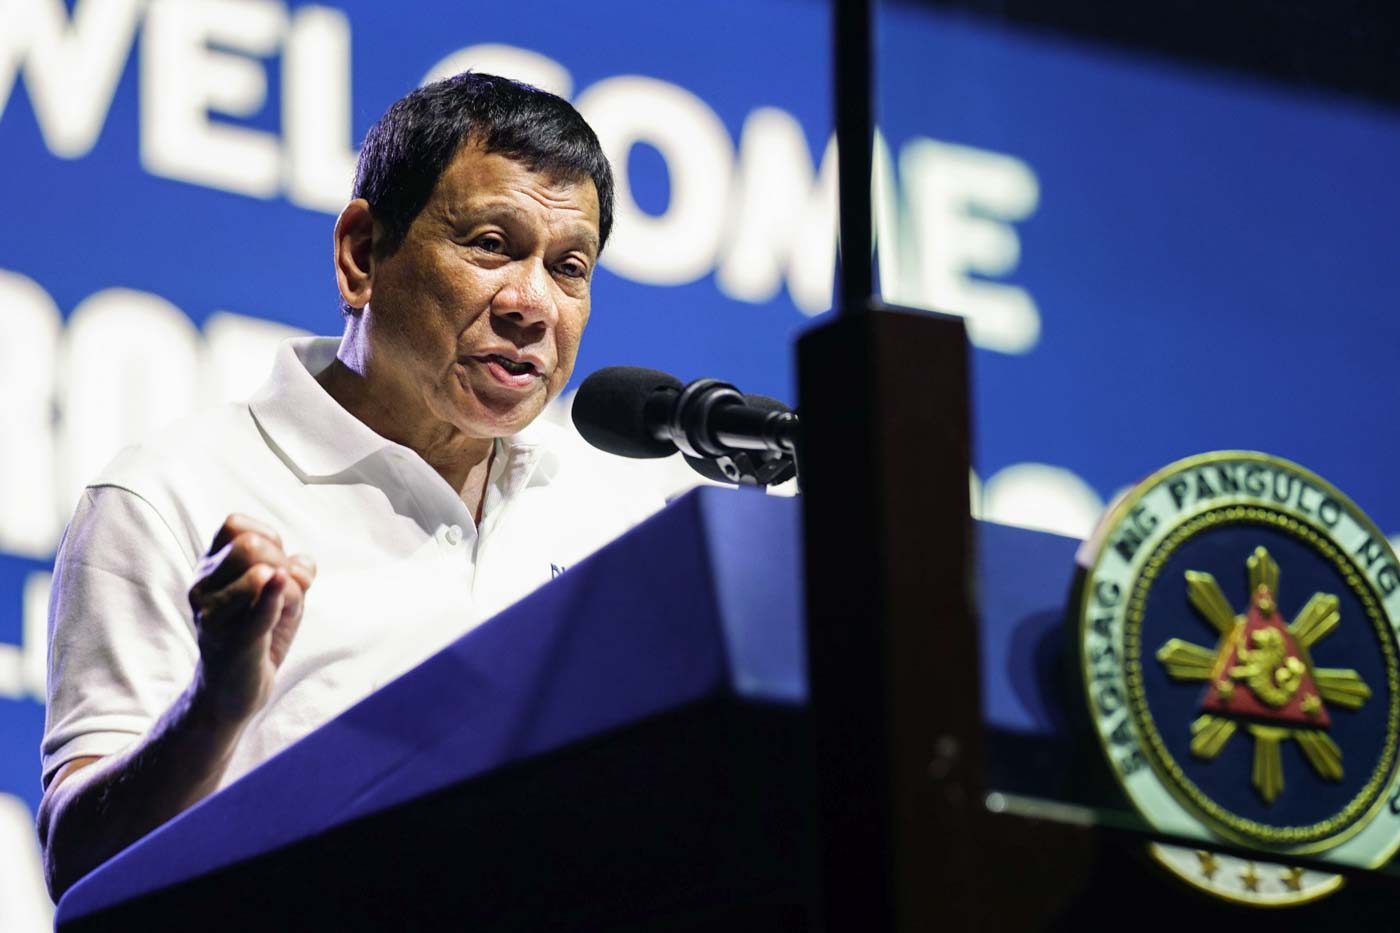 Human rights law group calls Oust Duterte plot ‘rubbish’